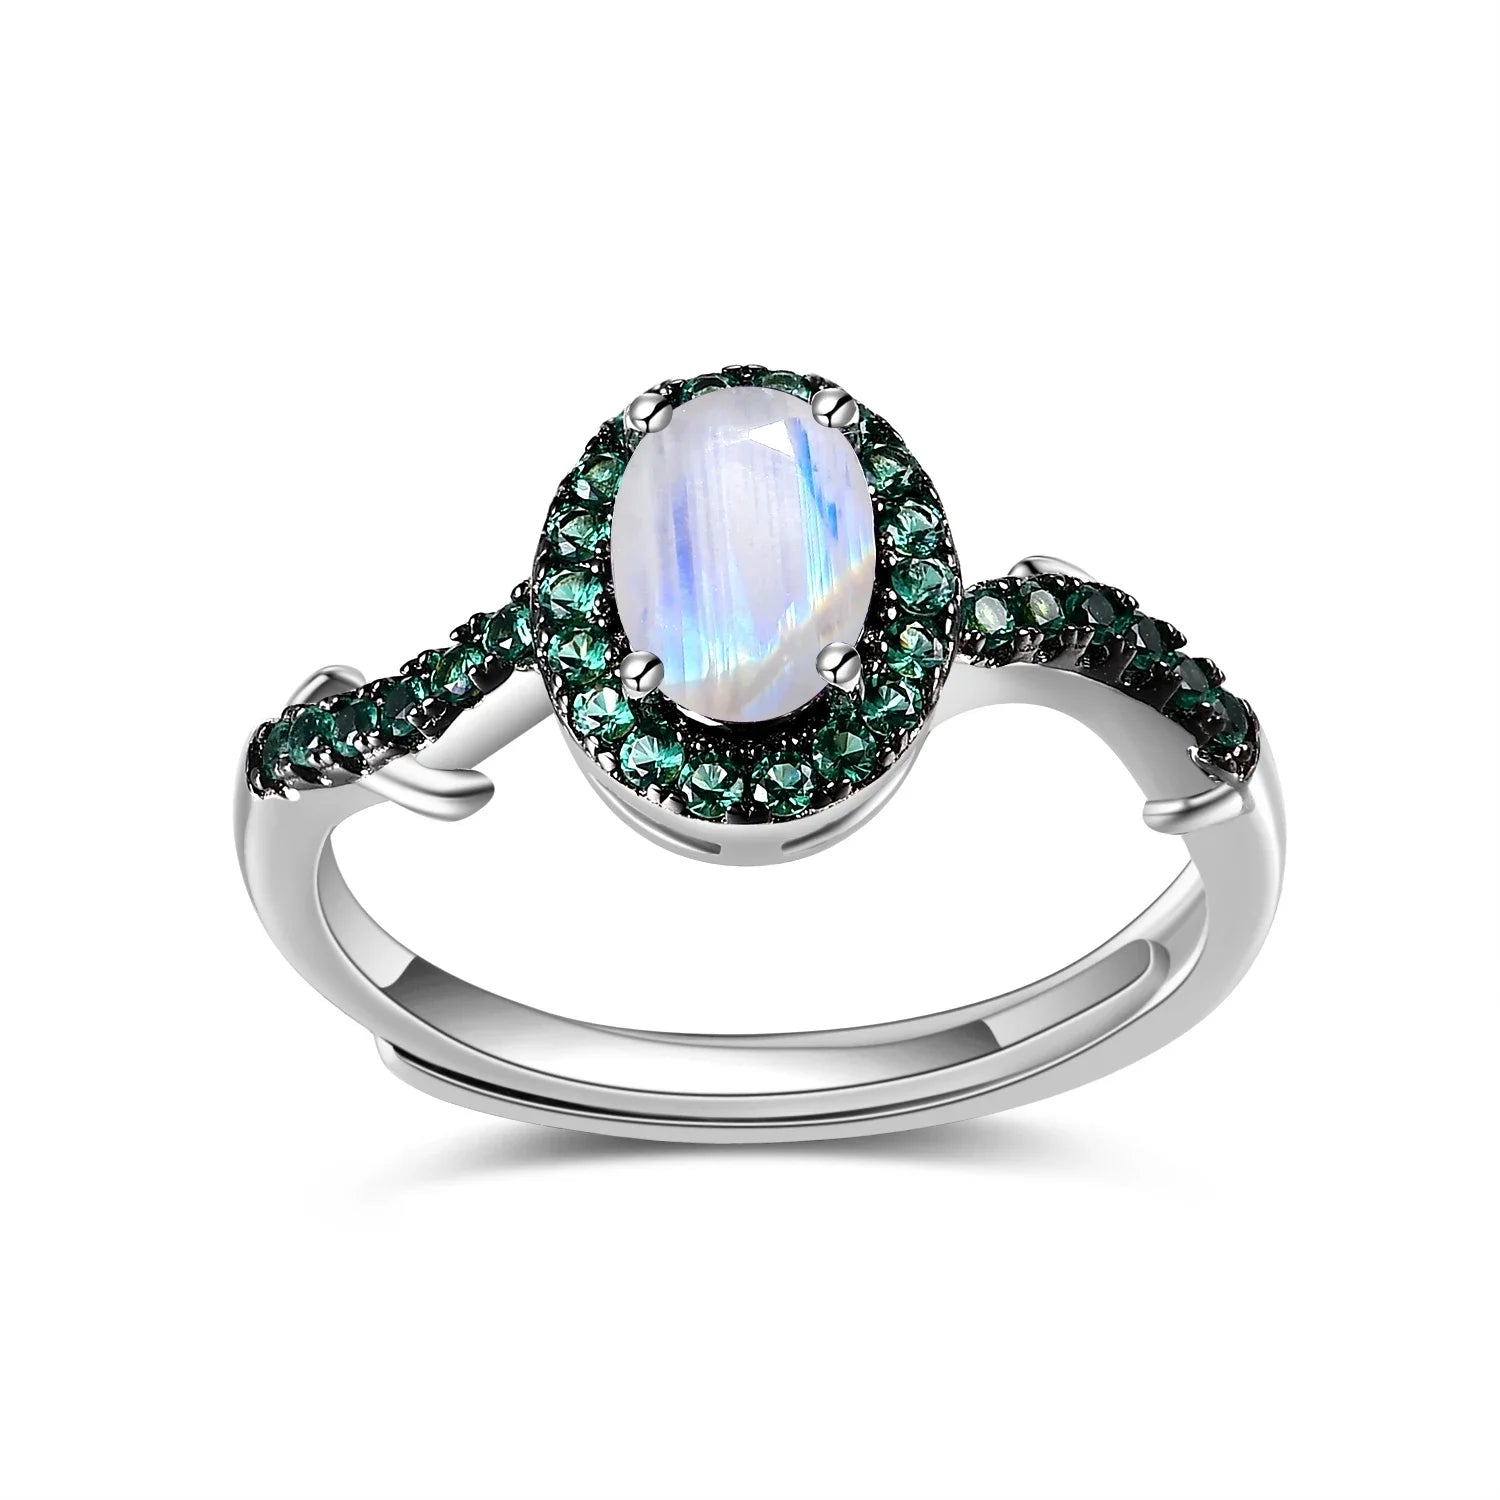 GEM'S BALLET Design Kite Amethyst Brambles Gemstone Ring Sets for Women Solid 925 Sterling Silver Luxury Kite Wedding Jewelry resizable CHINA Moonstone | 925 Sterling Silver